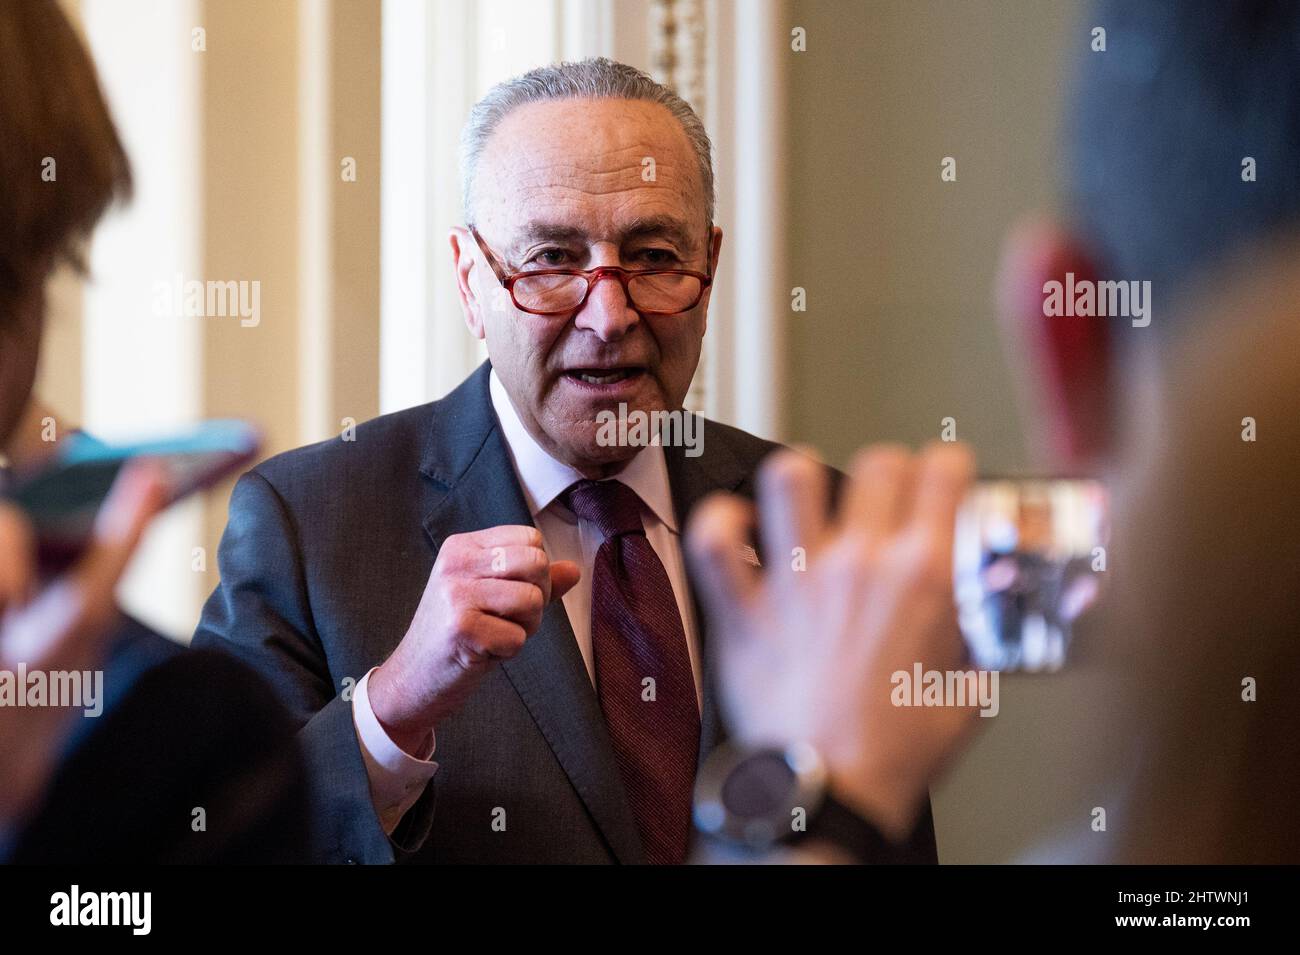 Washington, U.S. 02nd Mar, 2022. March 2, 2022 - Washington, DC, United States: Senate Majority Leader Chuck Schumer (D-NY) speaking with the press about his meeting with Supreme Court nominee Judge Ketanji Brown Jackson. (Photo by Michael Brochstein/Sipa USA) Credit: Sipa USA/Alamy Live News Stock Photo